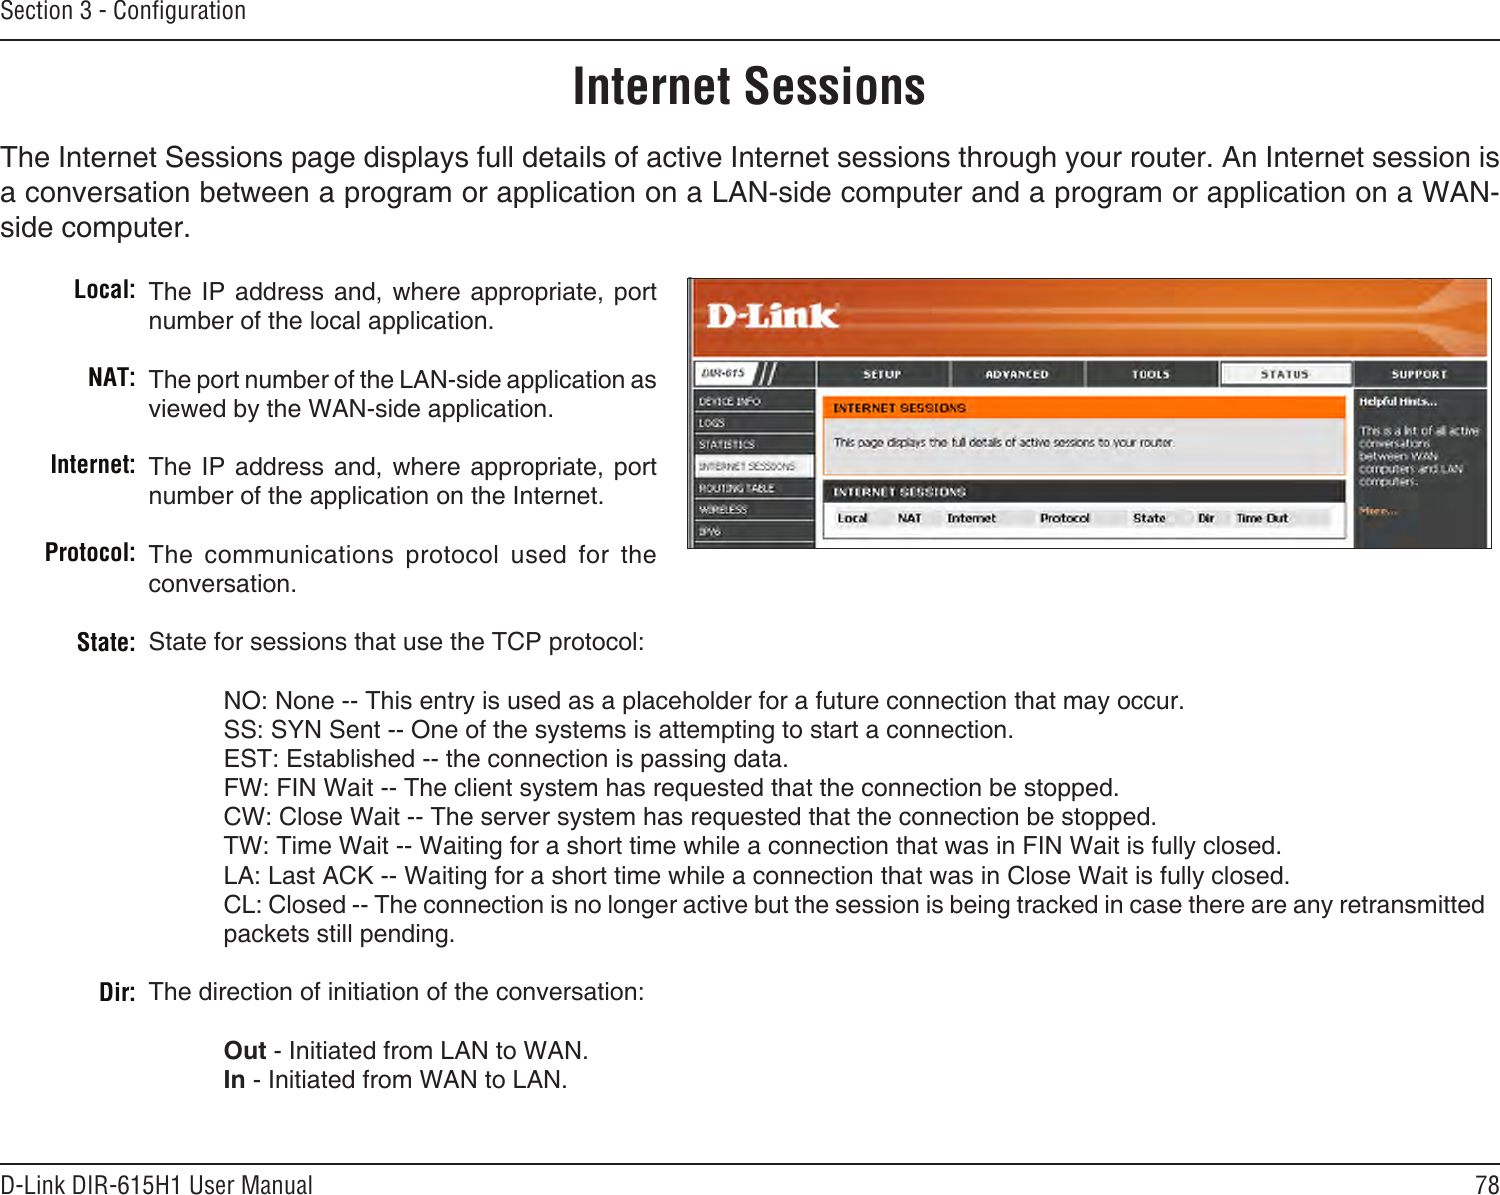 78D-Link DIR-615H1 User ManualSection 3 - CongurationInternet SessionsThe Internet Sessions page displays full details of active Internet sessions through your router. An Internet session is a conversation between a program or application on a LAN-side computer and a program or application on a WAN-side computer. Local:NAT:Internet:Protocol:State:Dir:The IP  address  and,  where appropriate, port number of the local application. The port number of the LAN-side application as viewed by the WAN-side application. The IP  address  and,  where appropriate, port number of the application on the Internet. The  communications  protocol  used  for  the conversation. State for sessions that use the TCP protocol:  NO: None -- This entry is used as a placeholder for a future connection that may occur.  SS: SYN Sent -- One of the systems is attempting to start a connection.  EST: Established -- the connection is passing data.  FW: FIN Wait -- The client system has requested that the connection be stopped.  CW: Close Wait -- The server system has requested that the connection be stopped.  TW: Time Wait -- Waiting for a short time while a connection that was in FIN Wait is fully closed.  LA: Last ACK -- Waiting for a short time while a connection that was in Close Wait is fully closed. CL: Closed -- The connection is no longer active but the session is being tracked in case there are any retransmitted packets still pending.The direction of initiation of the conversation:   Out - Initiated from LAN to WAN.  In - Initiated from WAN to LAN.